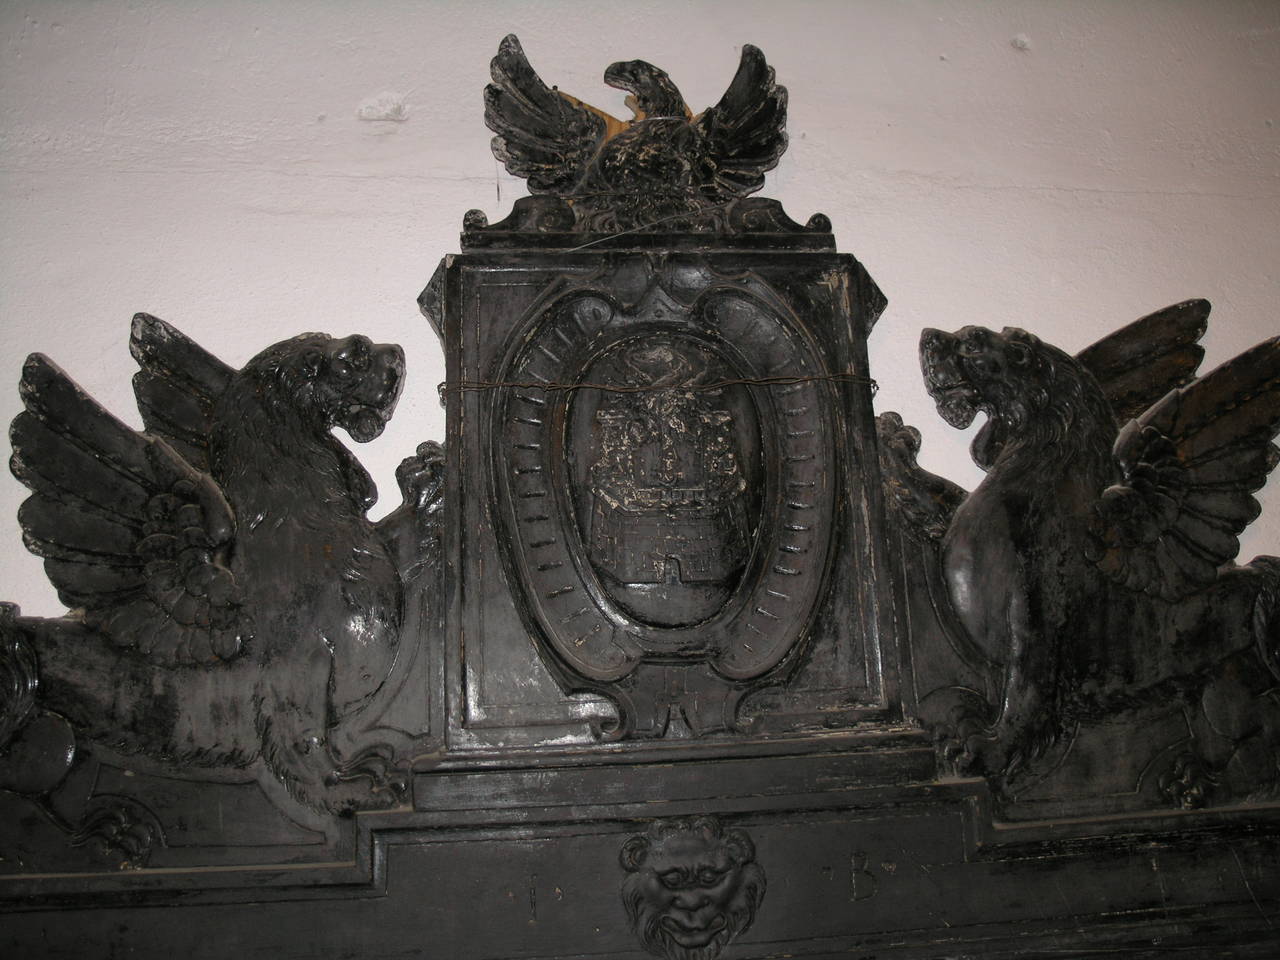 Antique Fireplace Made of Ardesia
Comes from the house of the prince of Rapallo, IT
Rare Renaissance fireplace in richly carved slate; in the center the emblem with the insignia of the family supported by a pair of griffins and surmounted by an